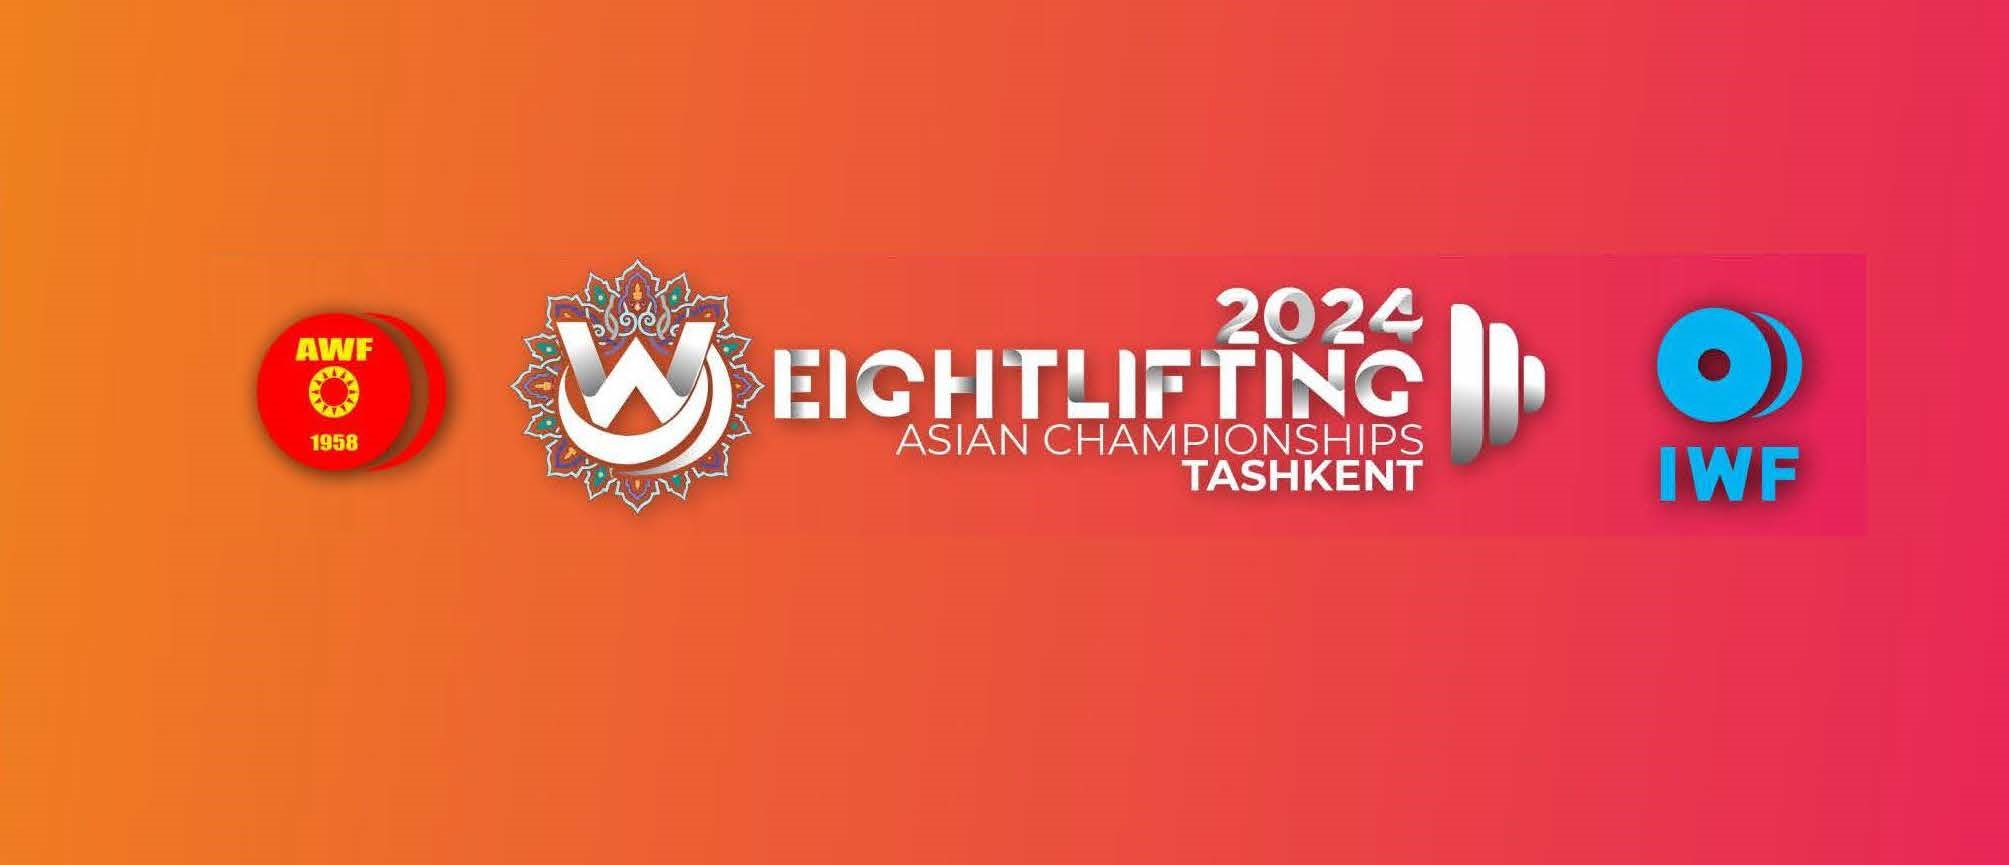 2024 ASIAN WEIGHTLIFTING CHAMPIONSHIPS